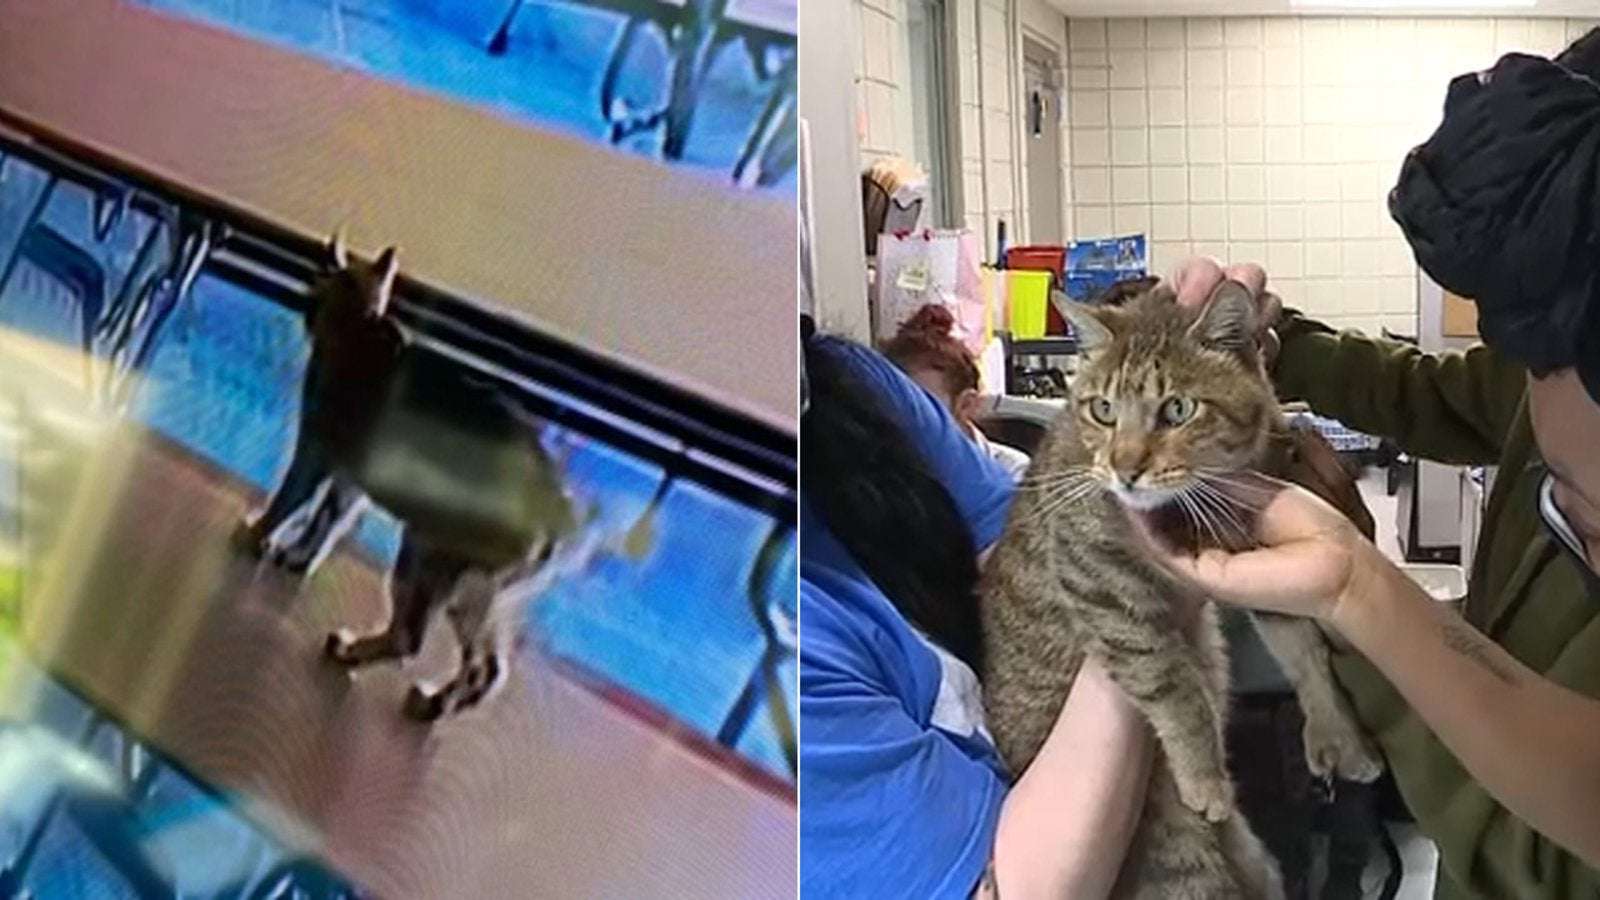 image for 'Bobcat' causes Pennsylvania high school evacuation, revealed to be missing house cat